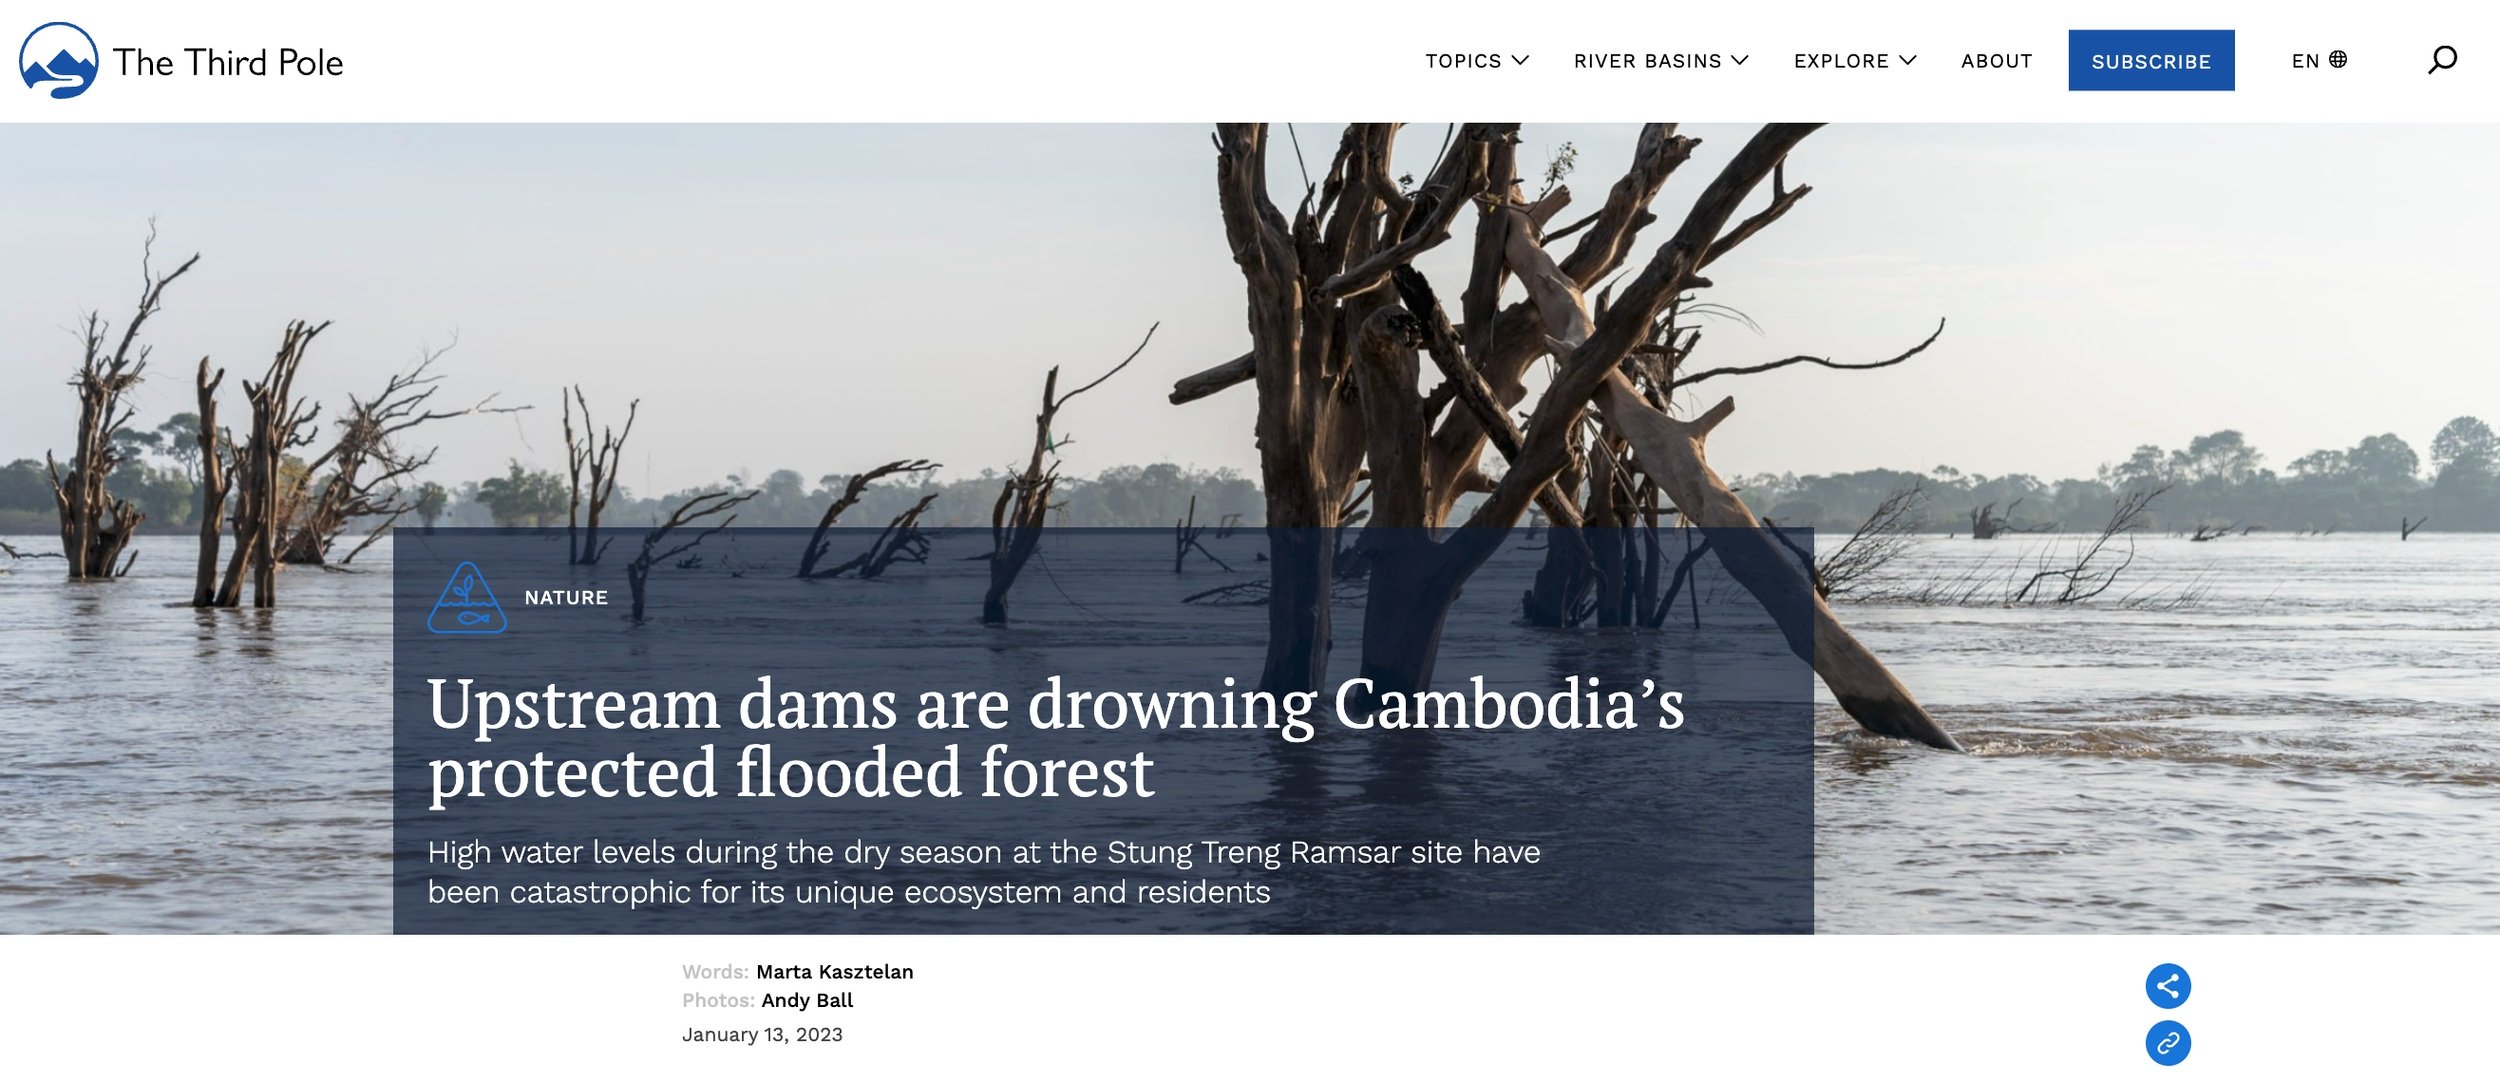 13th+January+2023+Upstream+dams+are+drowning+Cambodia%E2%80%99s+protected+flooded+forest+-+The+Third+Pole.jpg